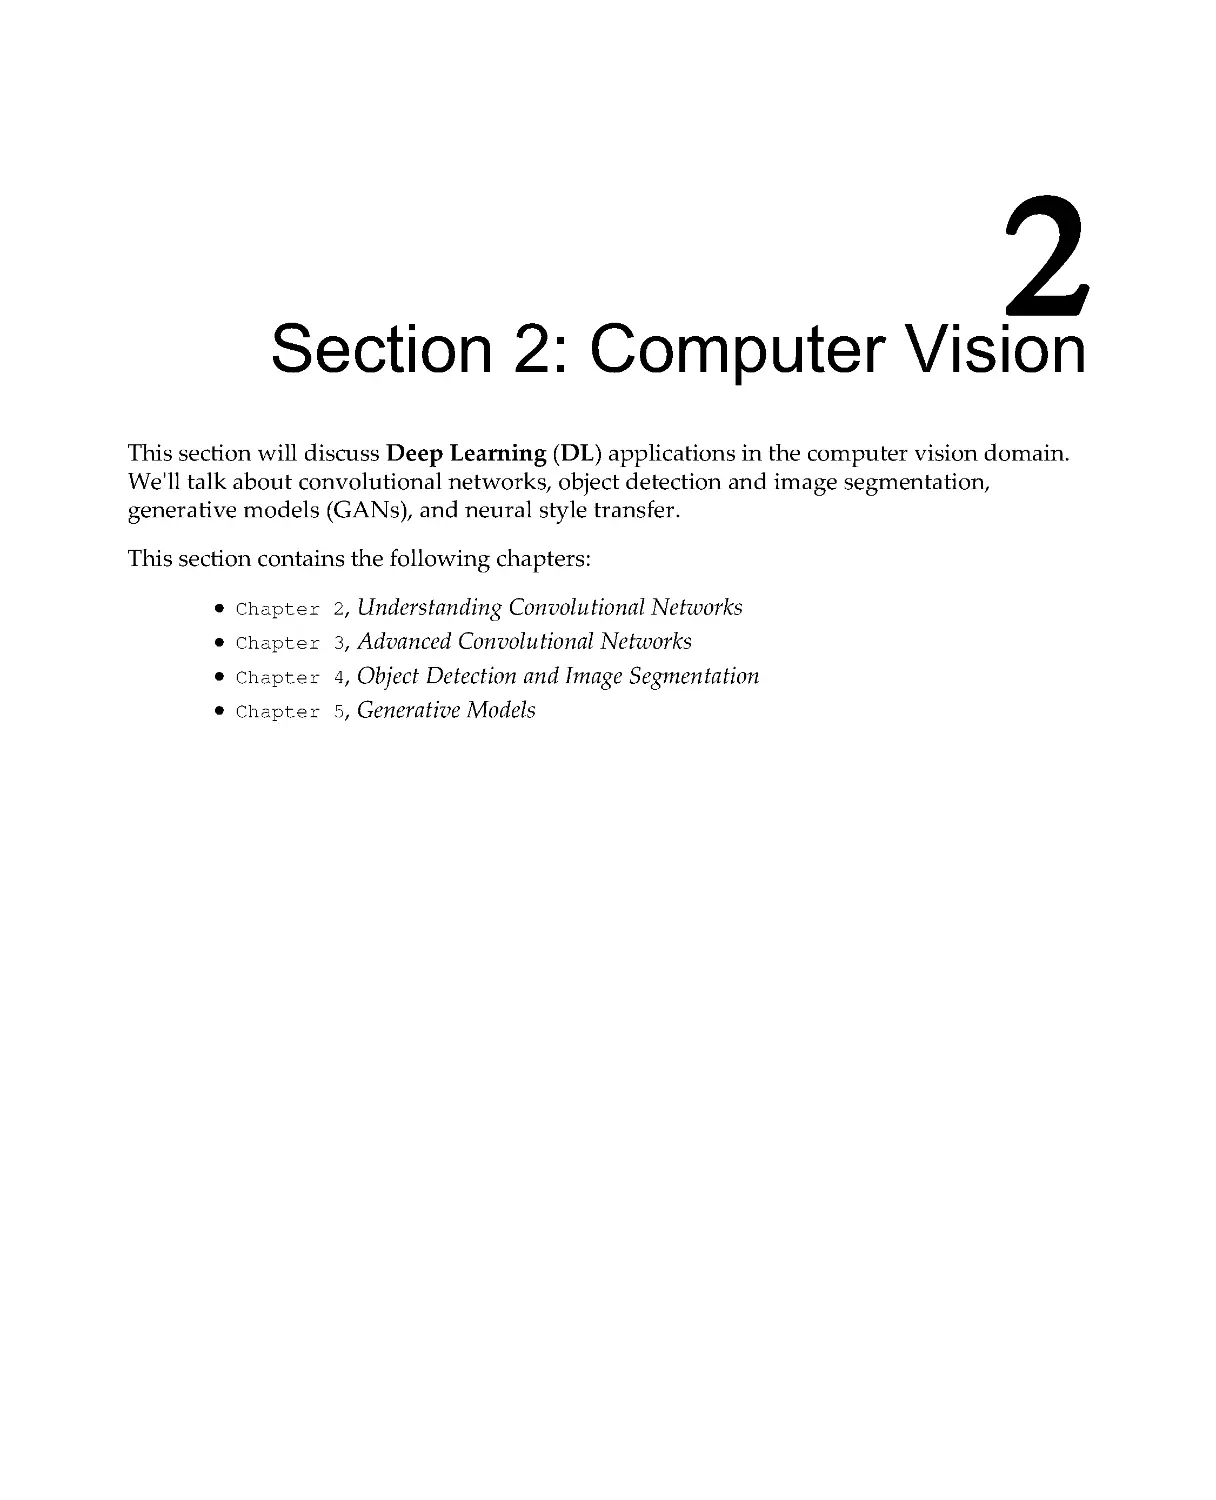 Section 2: Computer Vision